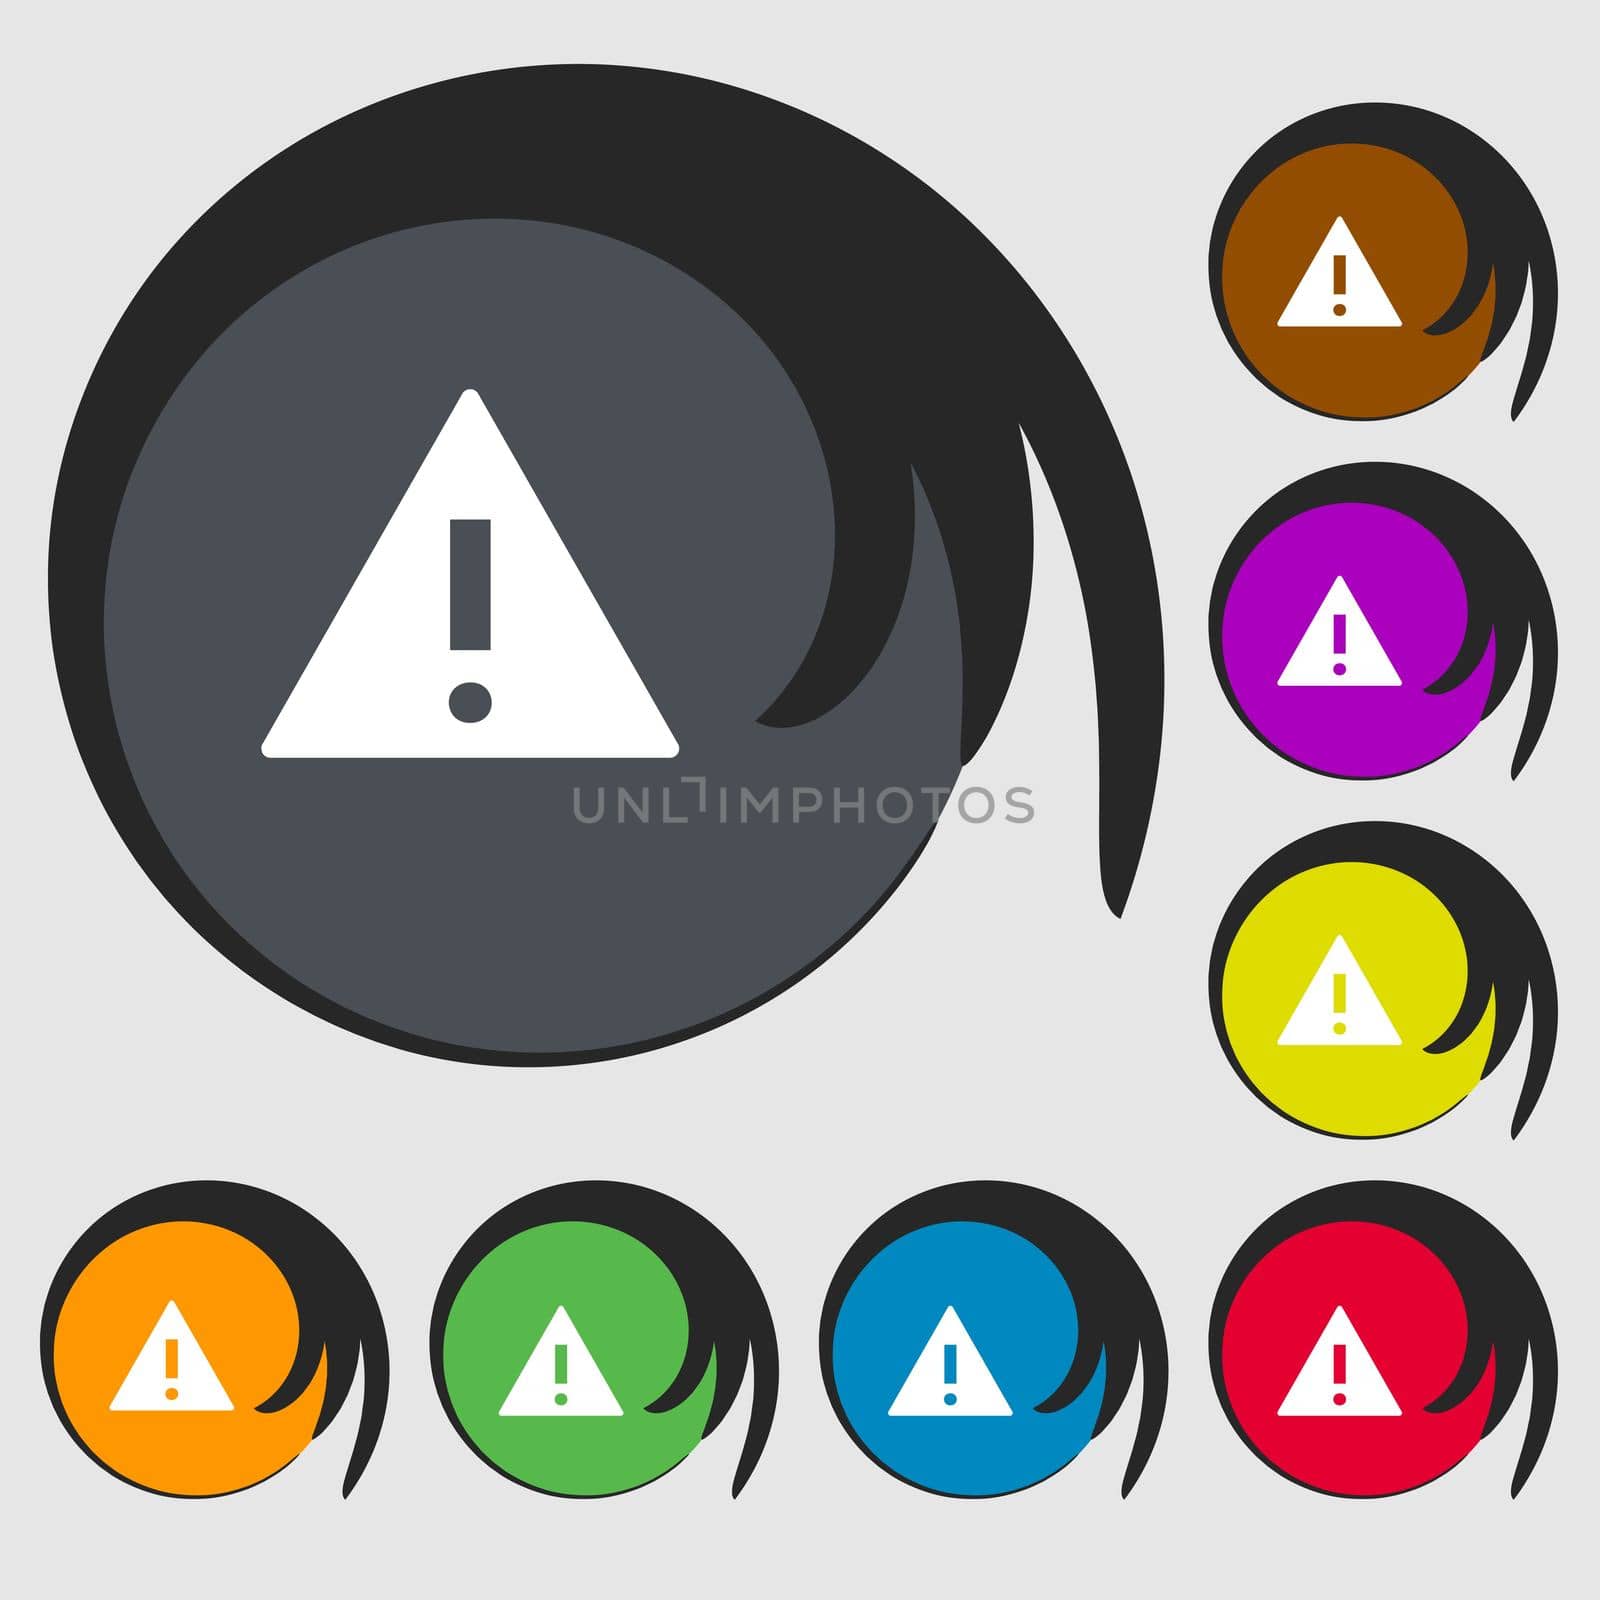 Attention sign icon. Exclamation mark. Hazard warning symbol. Symbols on eight colored buttons. illustration